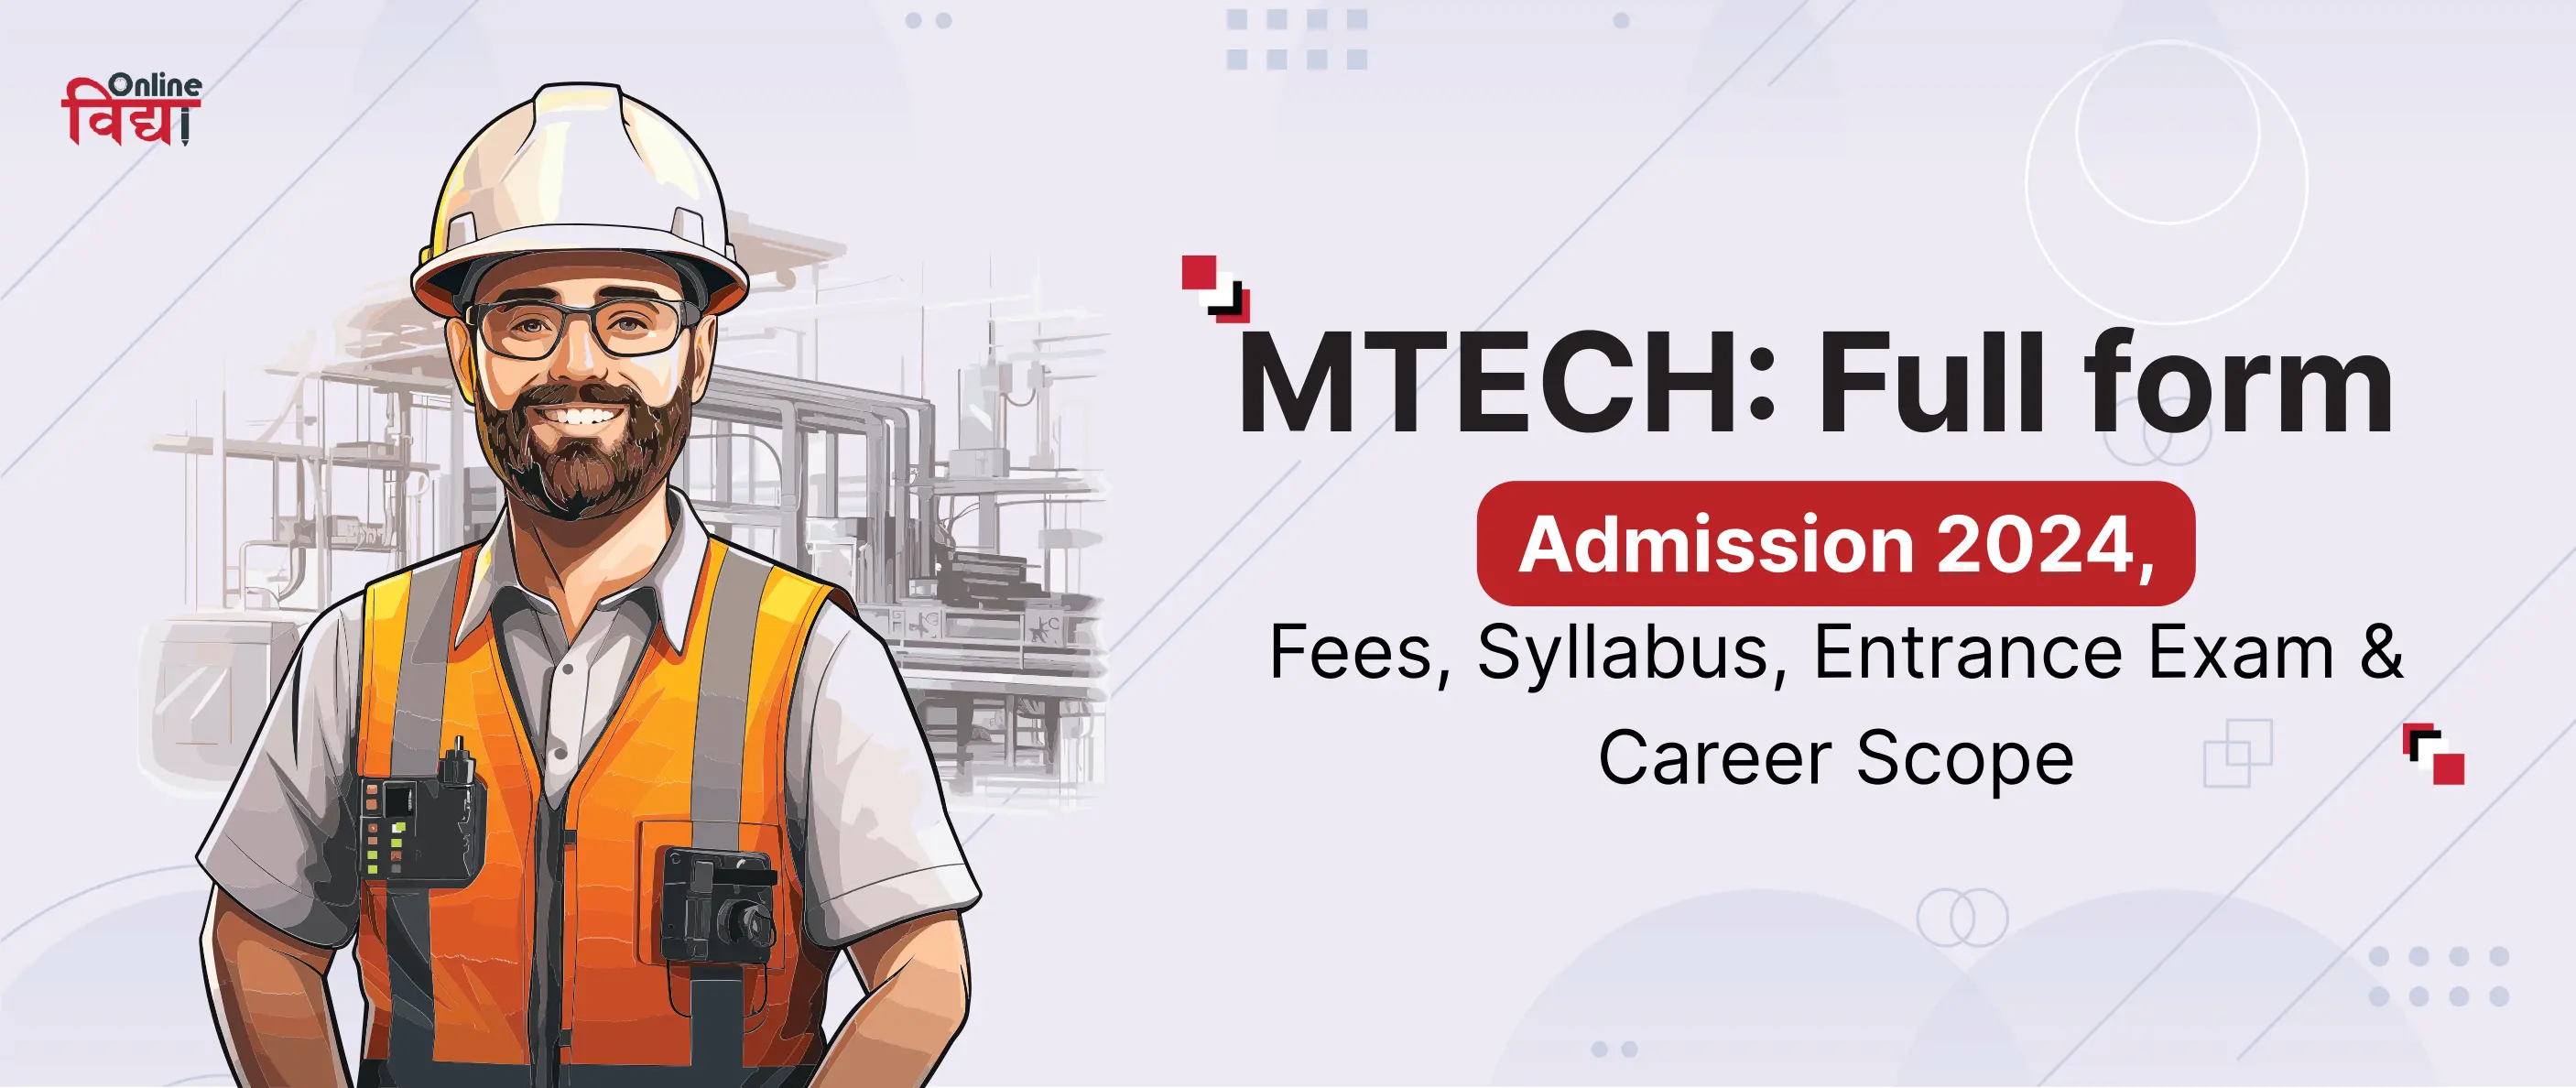 MTech: Full form, Admission 2024, Fees, Syllabus, Entrance Exam & Career Scope